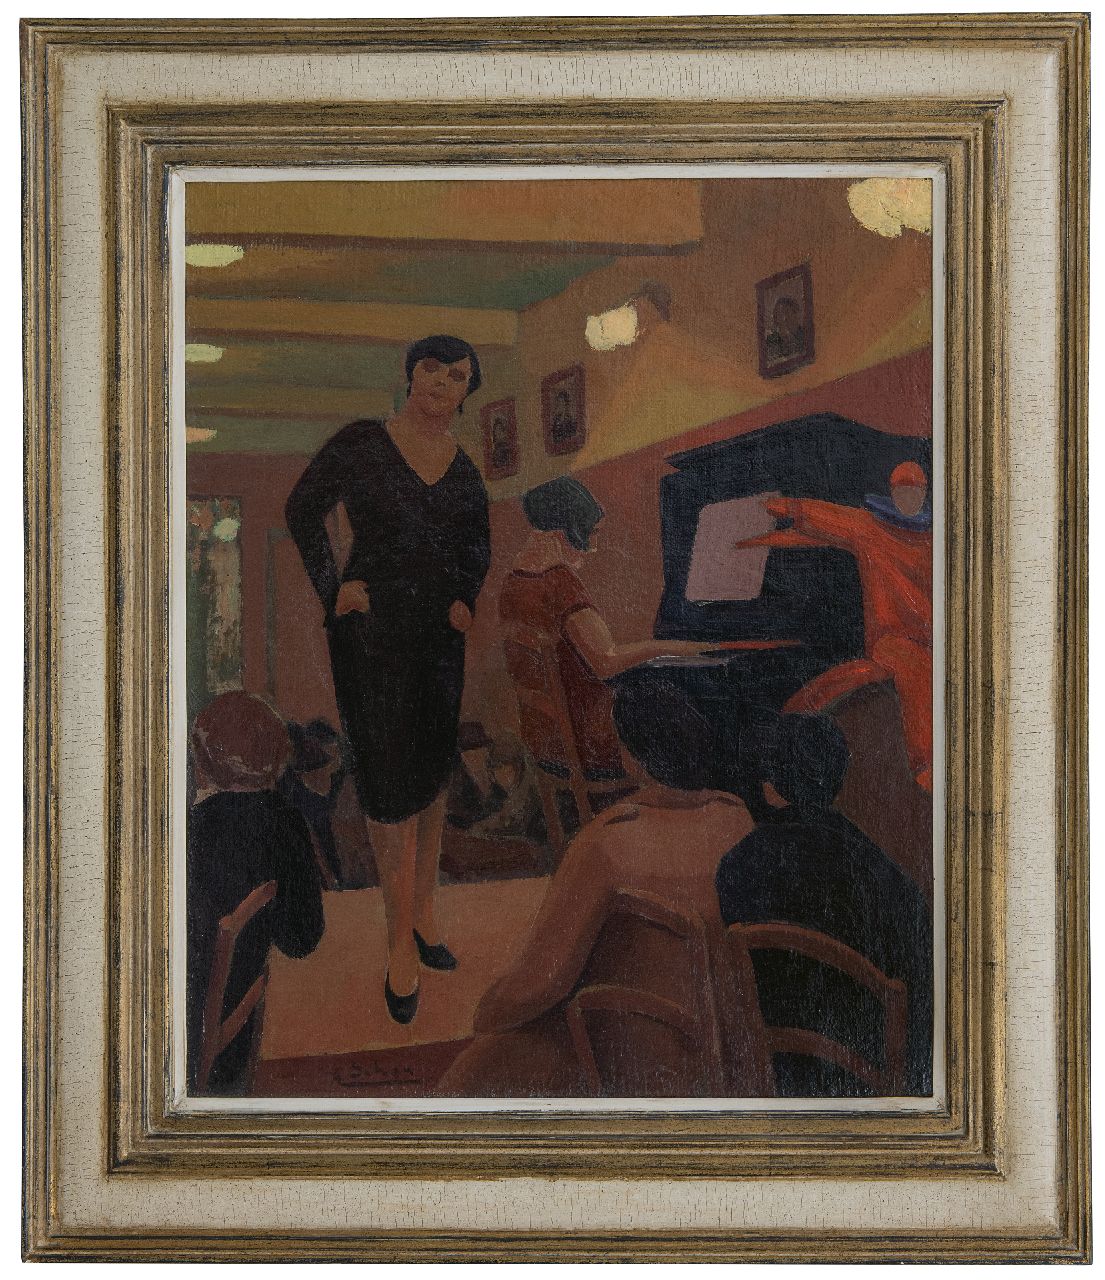 Schön A.  | Arthur Schön | Paintings offered for sale | Cabaret, oil on canvas 60.5 x 50.5 cm, signed l.l. and dated 1928 on reverse